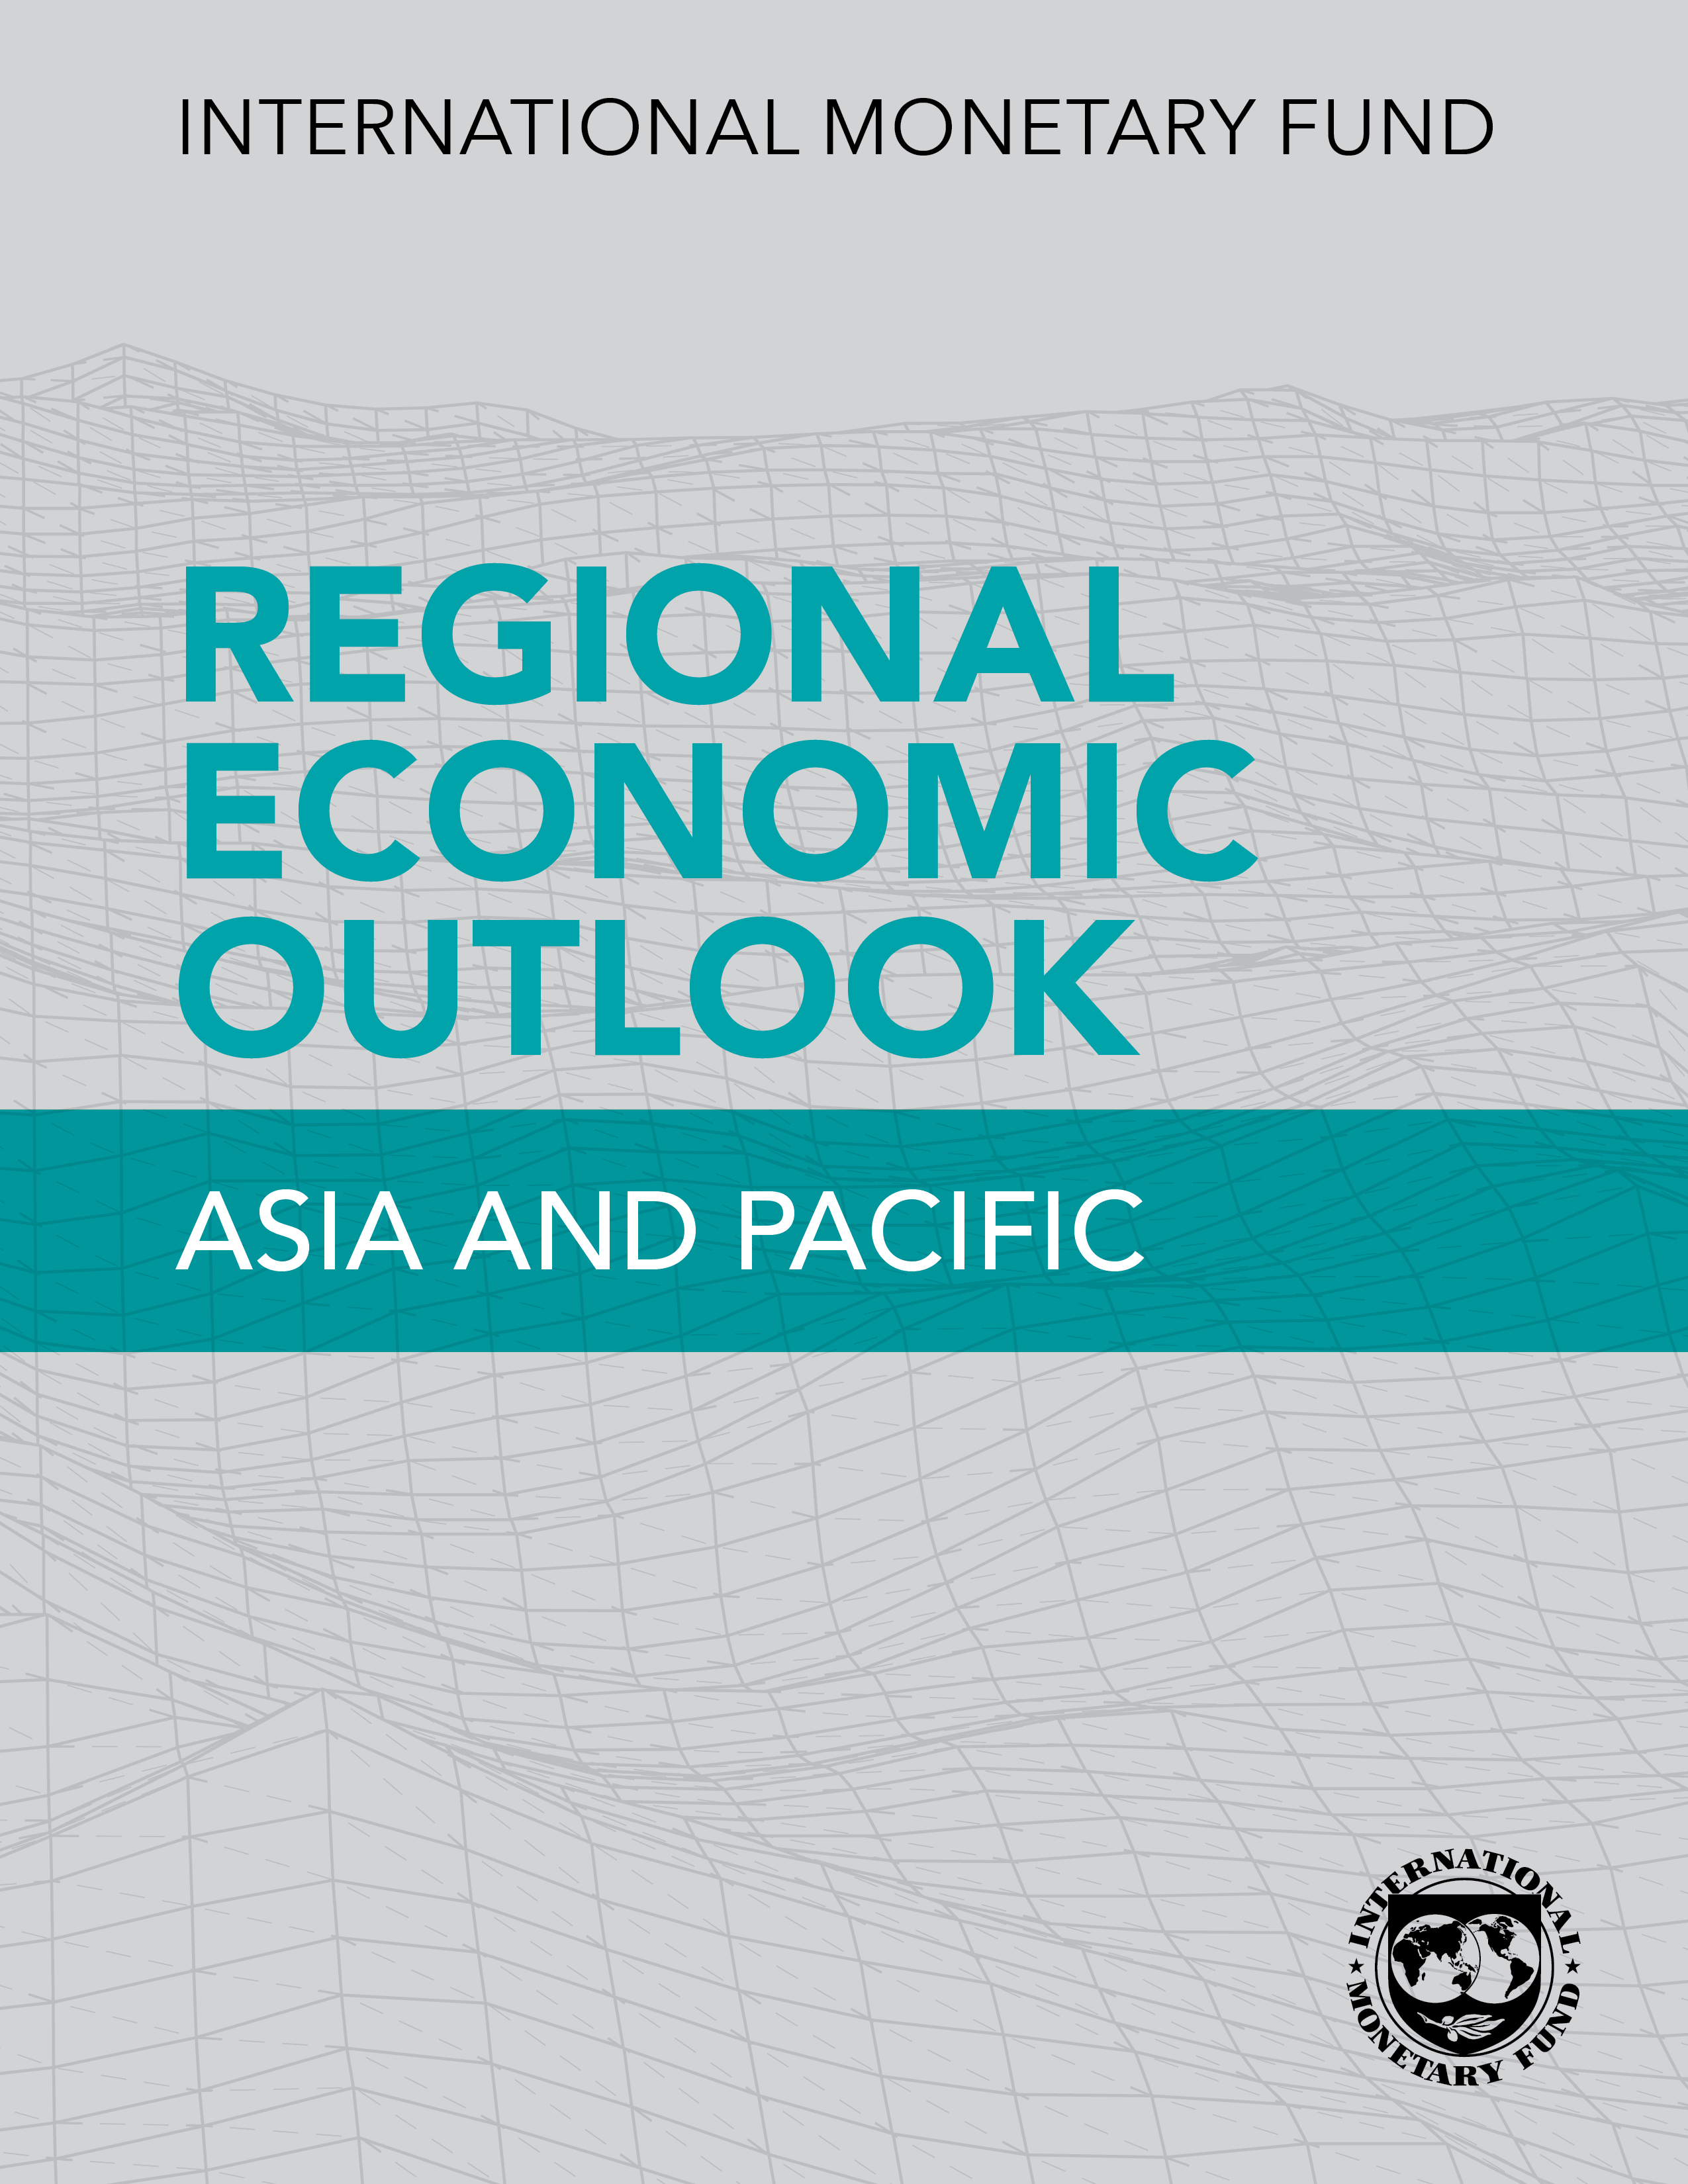 Asia and Pacific Region